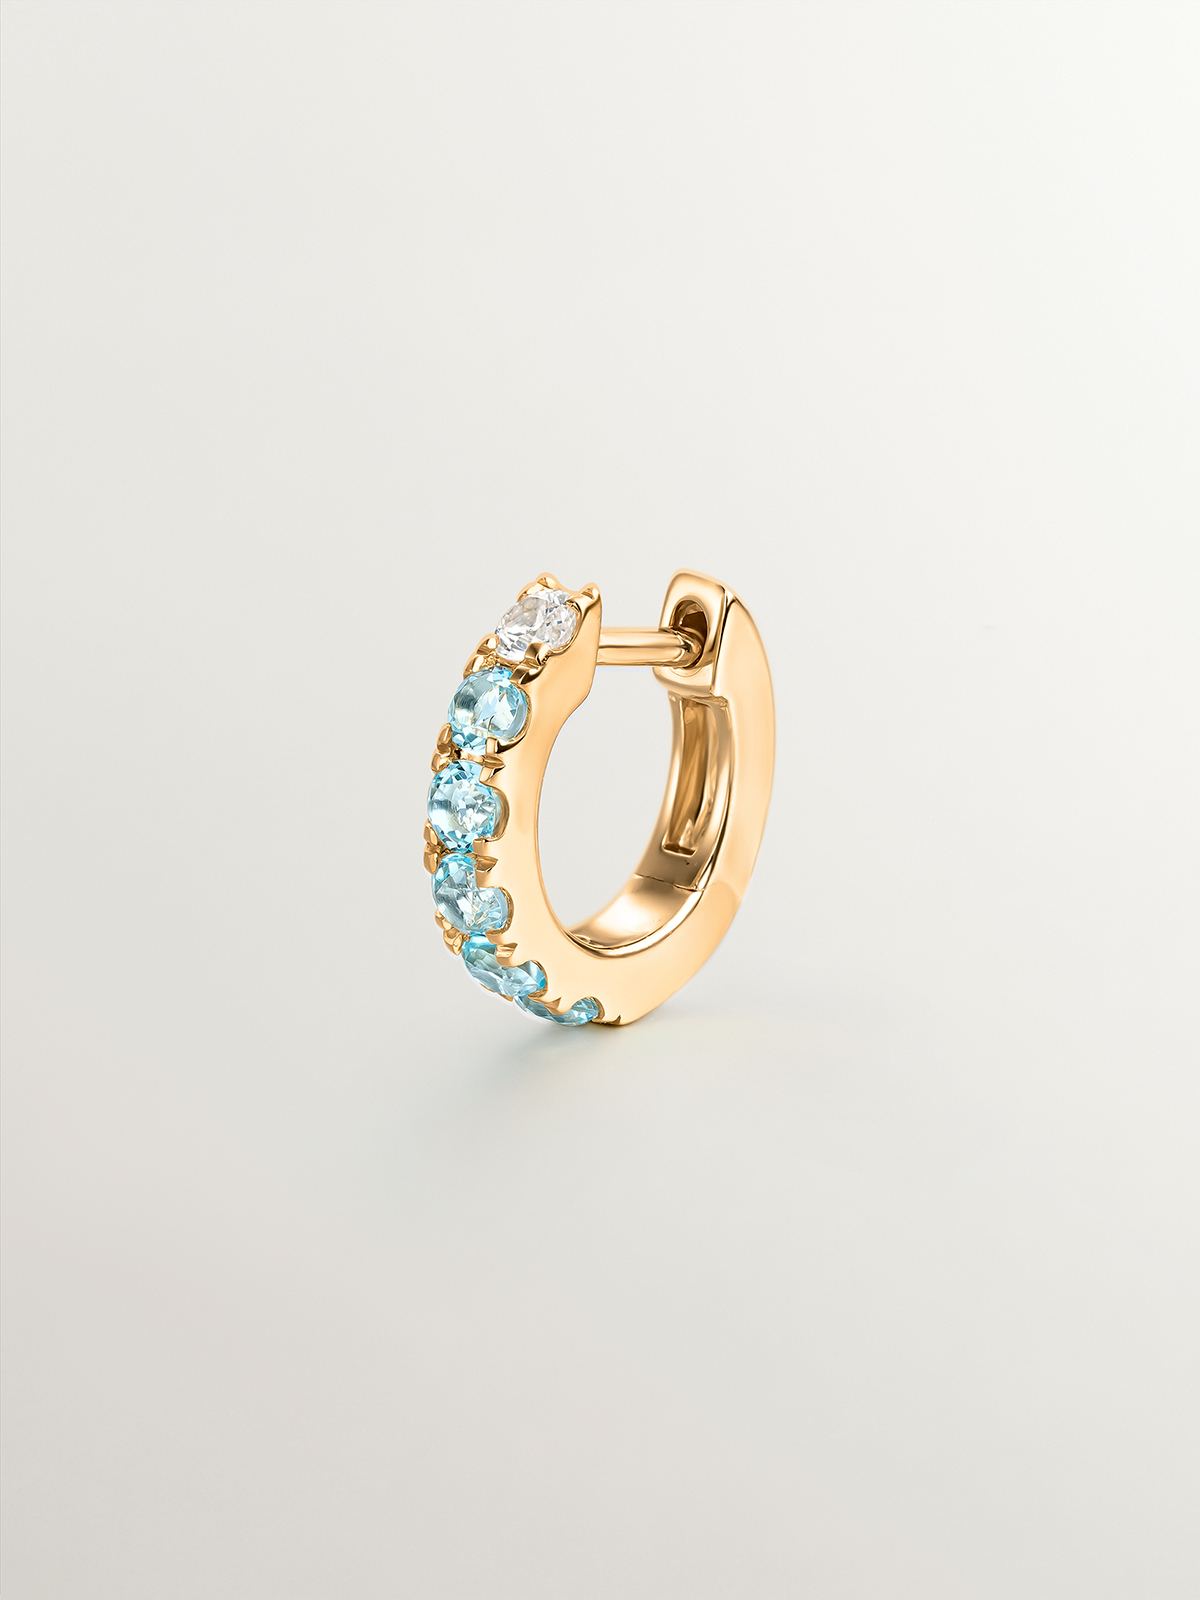 Individual 925 silver earring bathed in 18K yellow gold with white and blue sapphires.